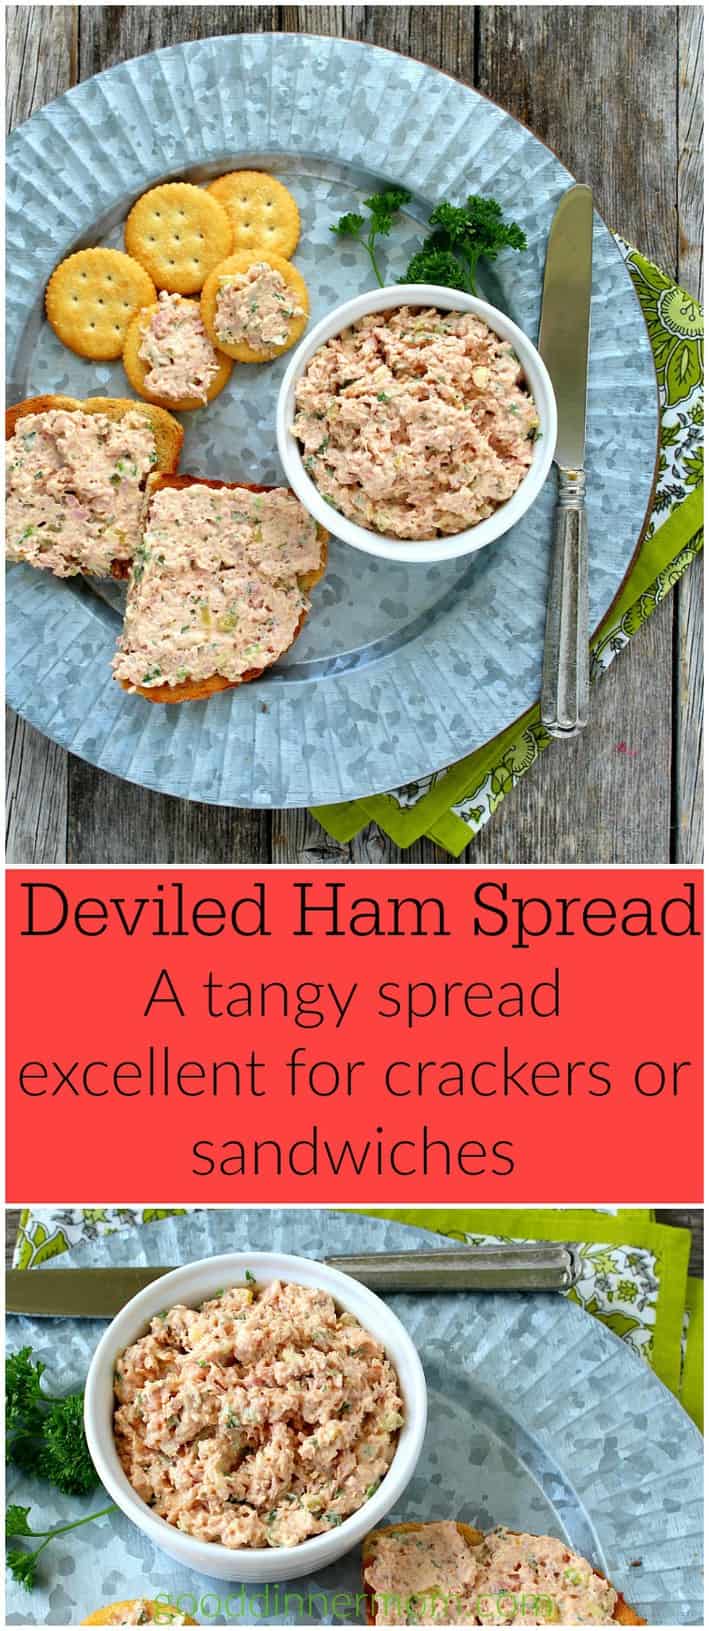 A fresh take on deviled ham. Better than anything out of a can and ready in just ten minutes.